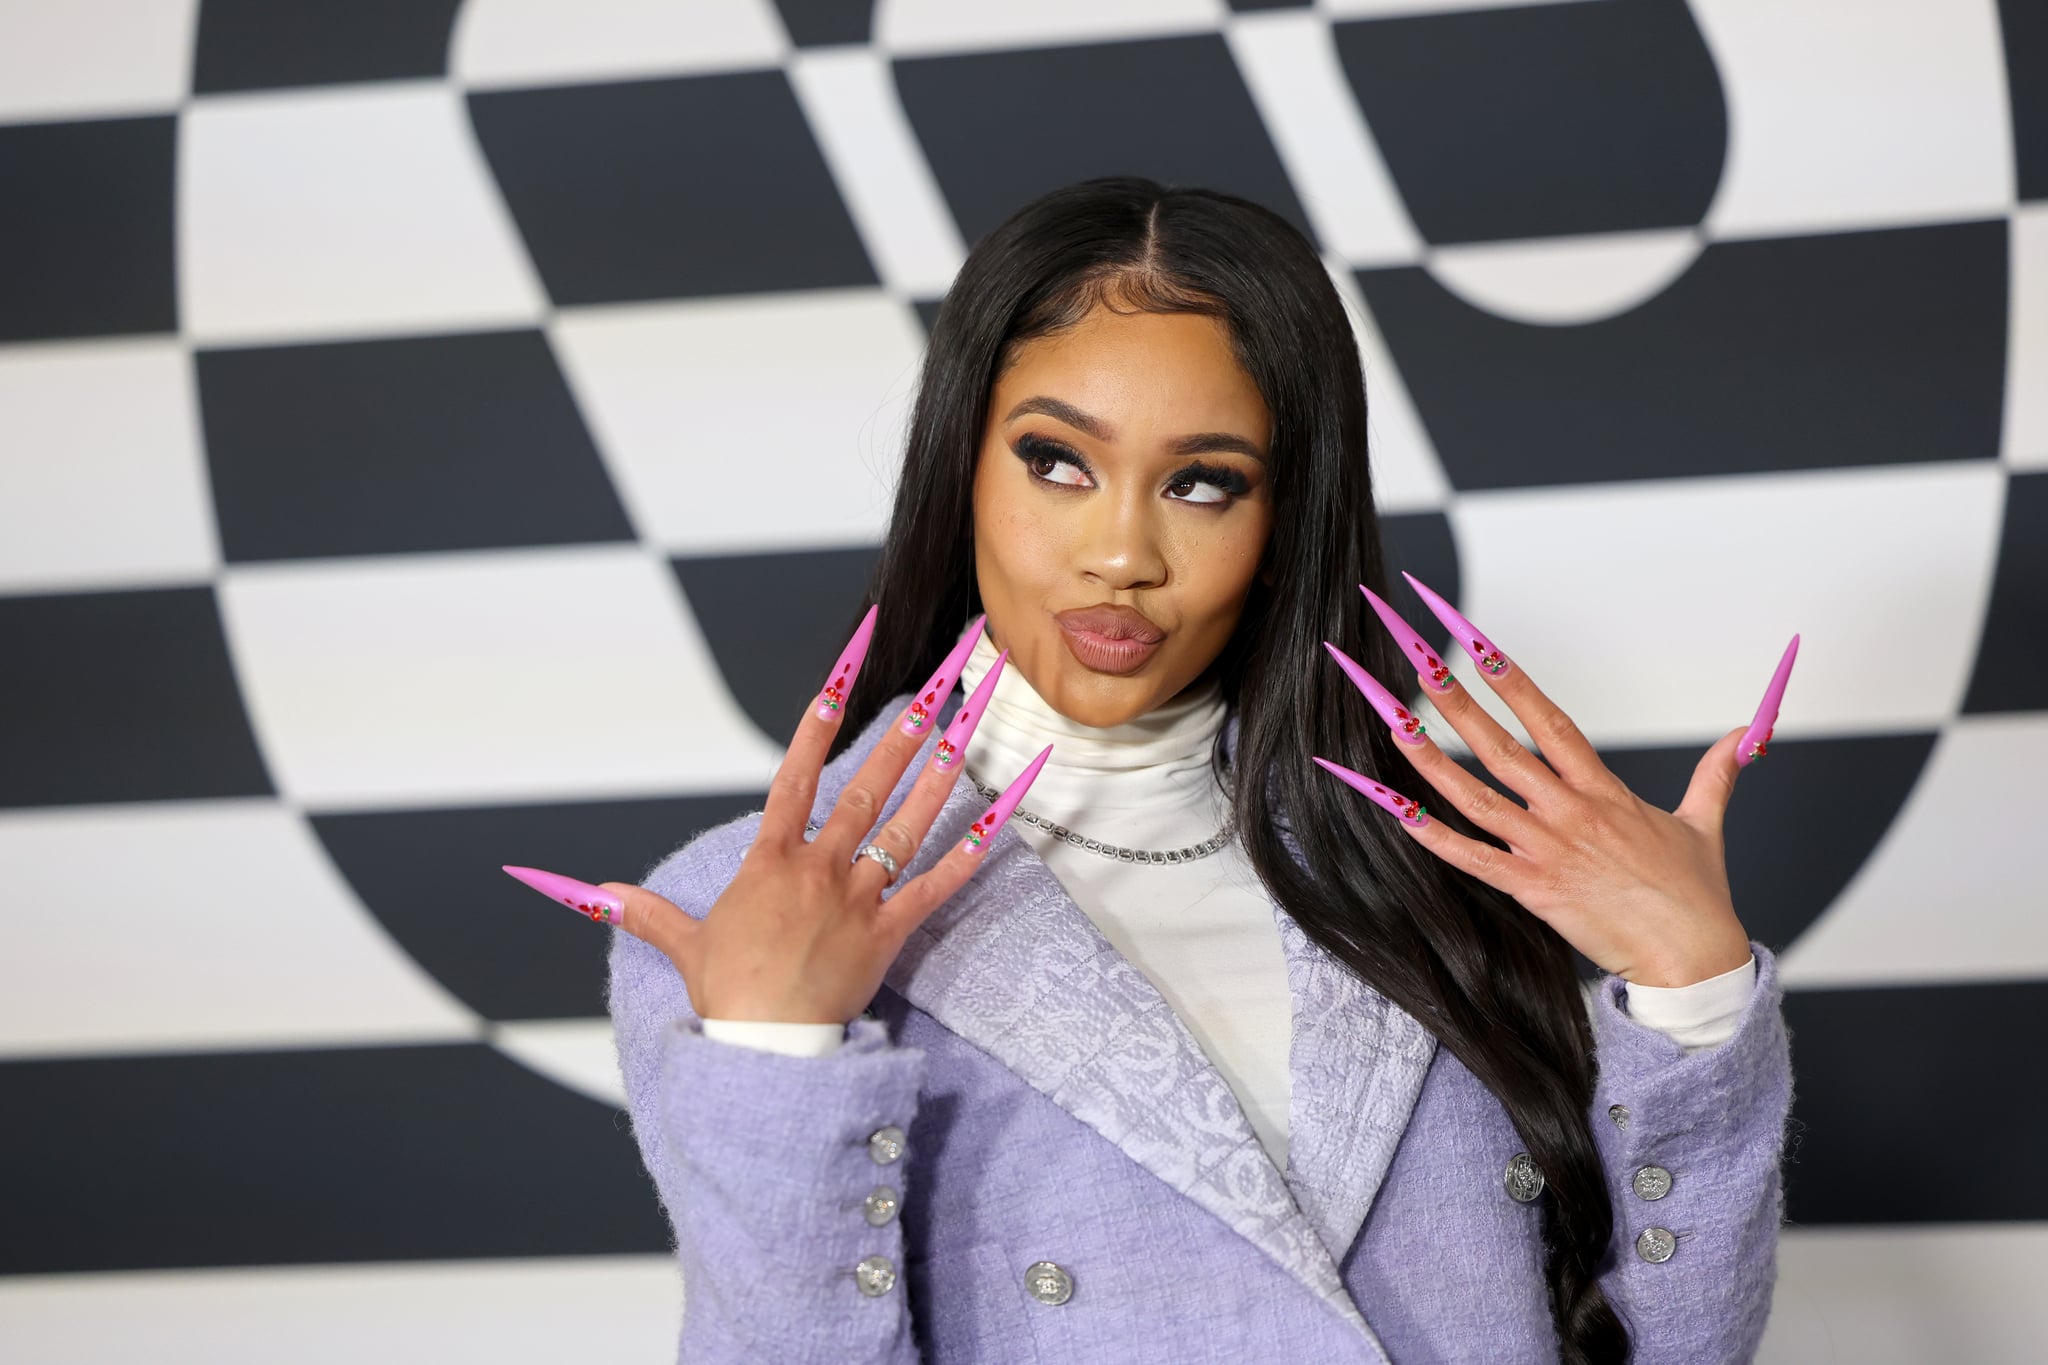 HOLLYWOOD, CALIFORNIA - FEBRUARY 02: Saweetie attends the Warner Music Group Pre-Grammy Party at Hollywood Athletic Club on February 02, 2023 in Hollywood, California. (Photo by Phillip Faraone/Getty Images for Warner Music)